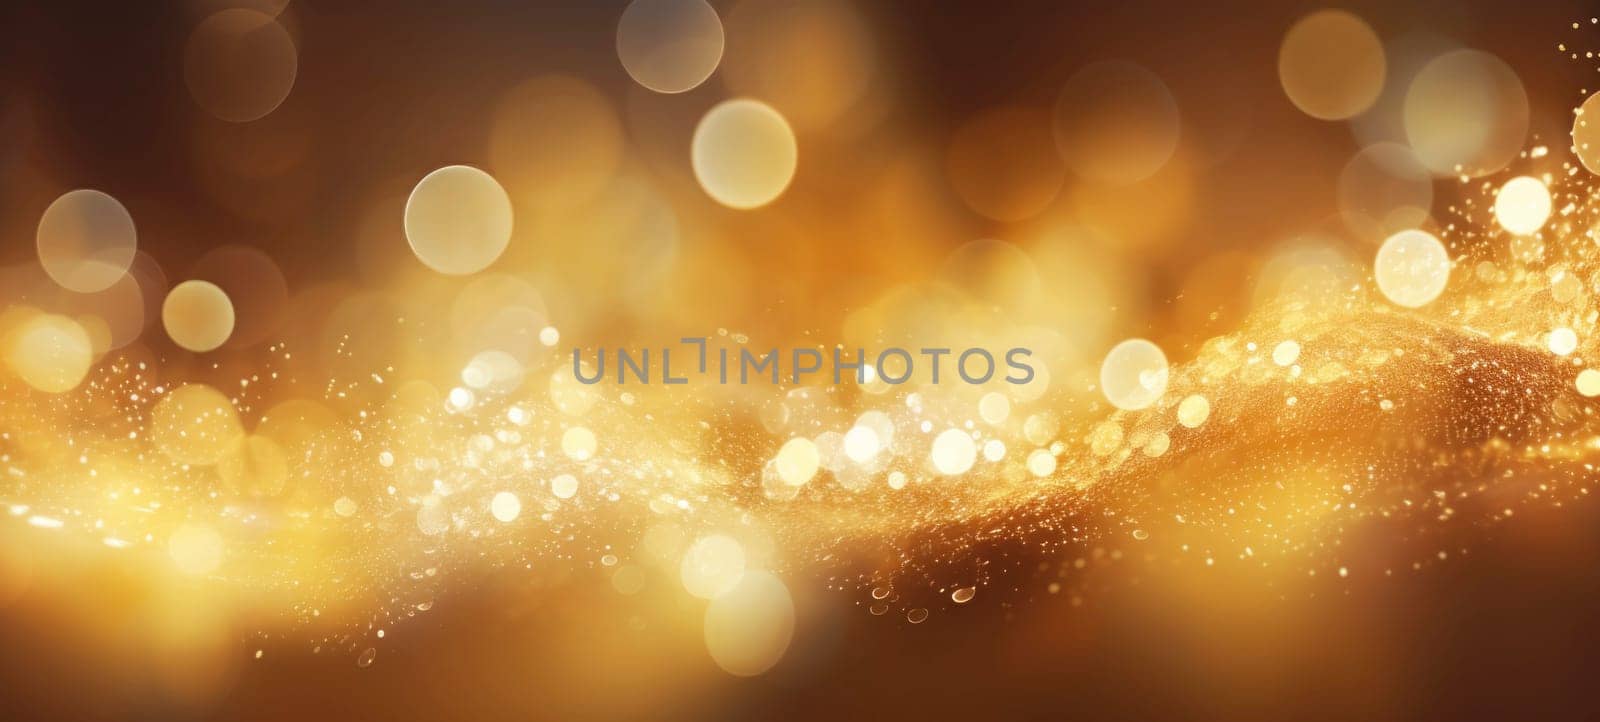 Abstract background with golden sparkles, shiny bokeh glitter lights by andreyz